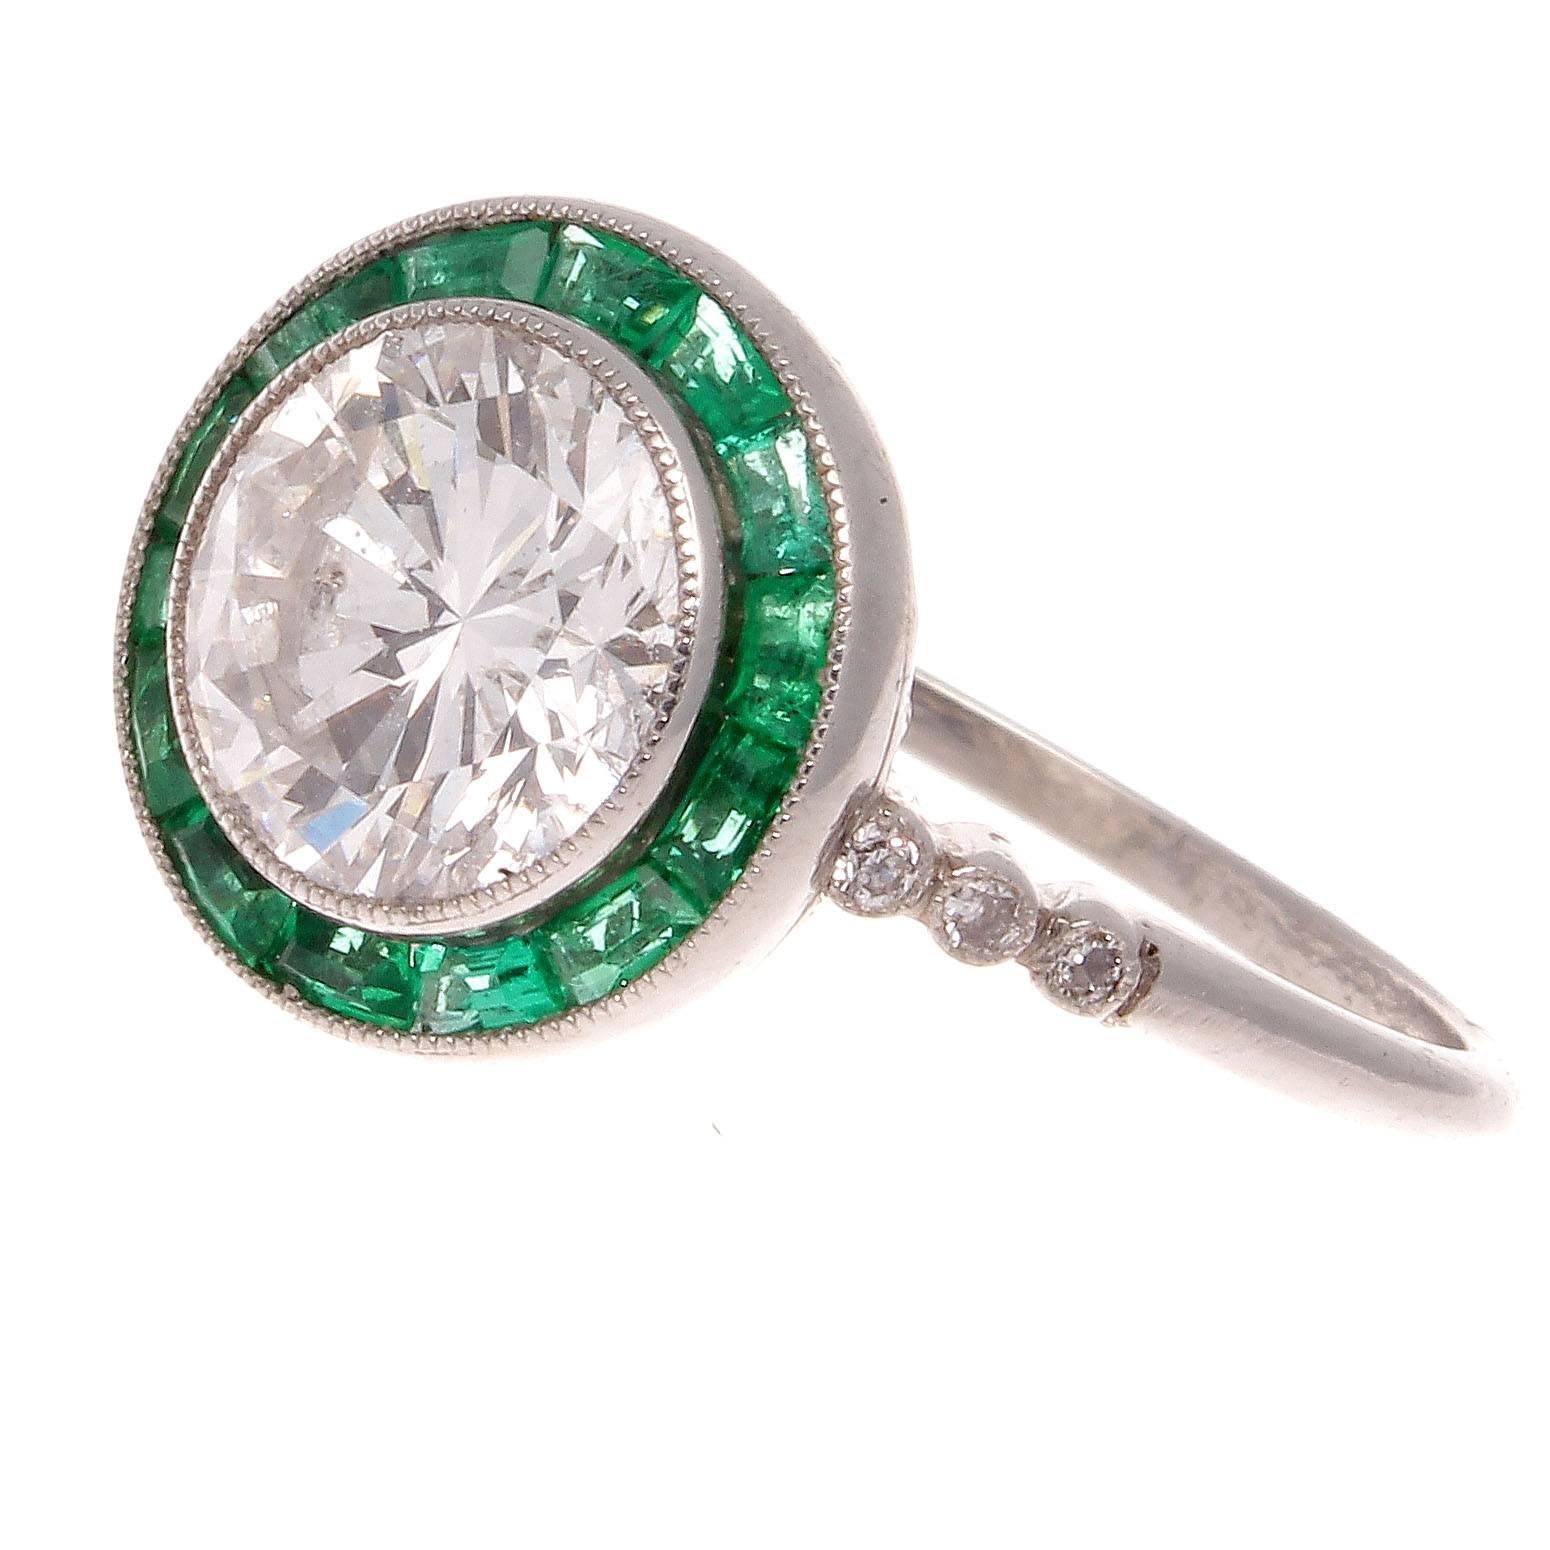 A timeless design that first appeared in the latter part of the 19th century. Featuring a 1.88 carat round brilliant cut diamond that is J,K color, VS1 clarity. Surrounded by a vibrant halo of forest green emeralds. Hand crafted in platinum.
Ring